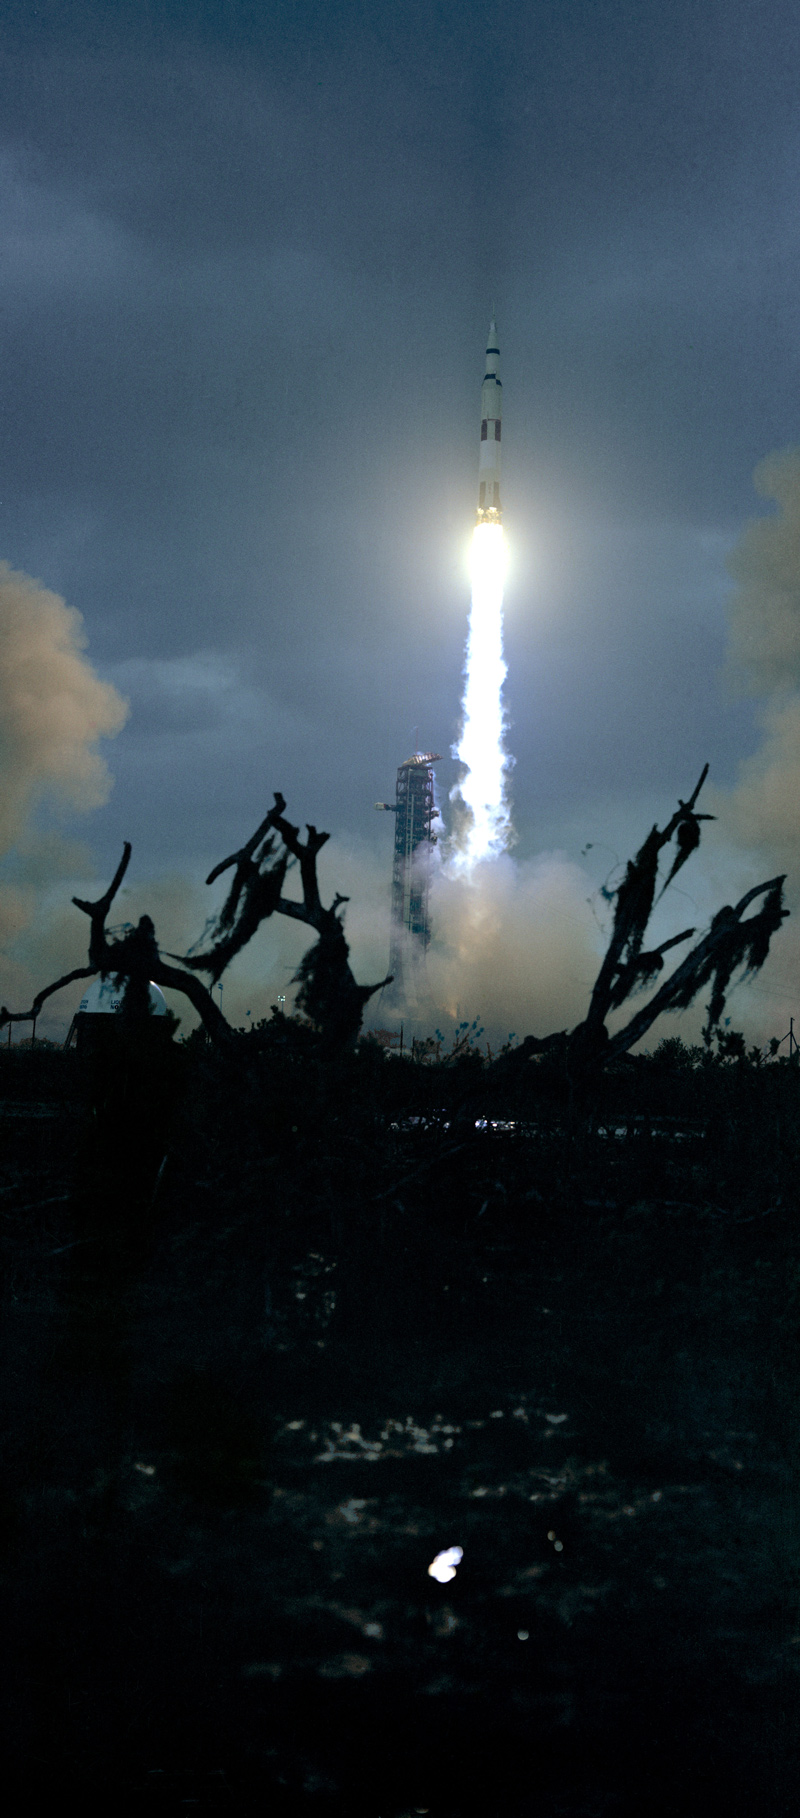 Apollo 14 liftoff, with scraggly tree branches silhouetted in the foreground